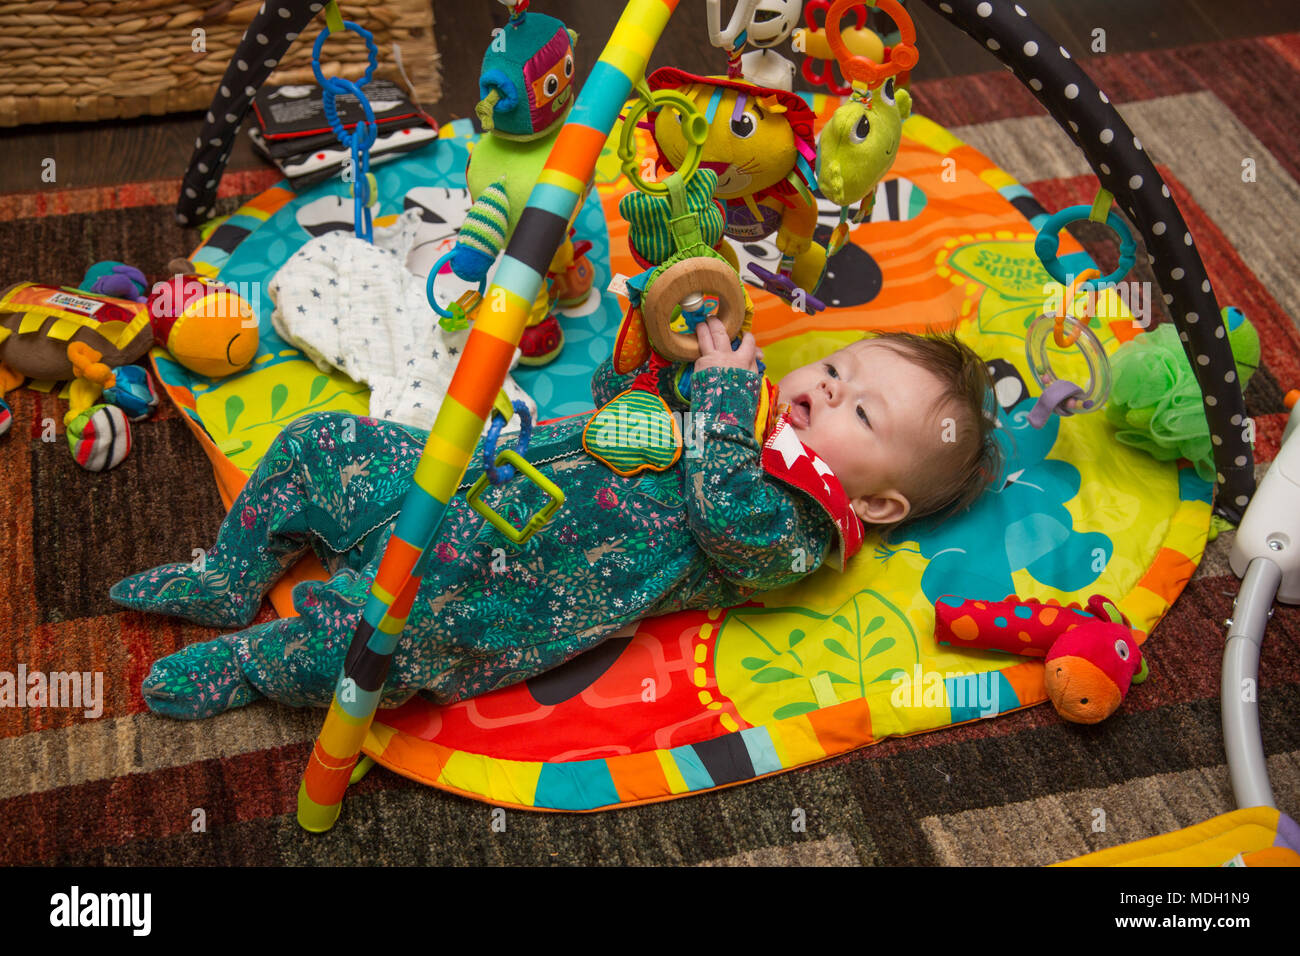 Baby playing on playmate Stock Photo 